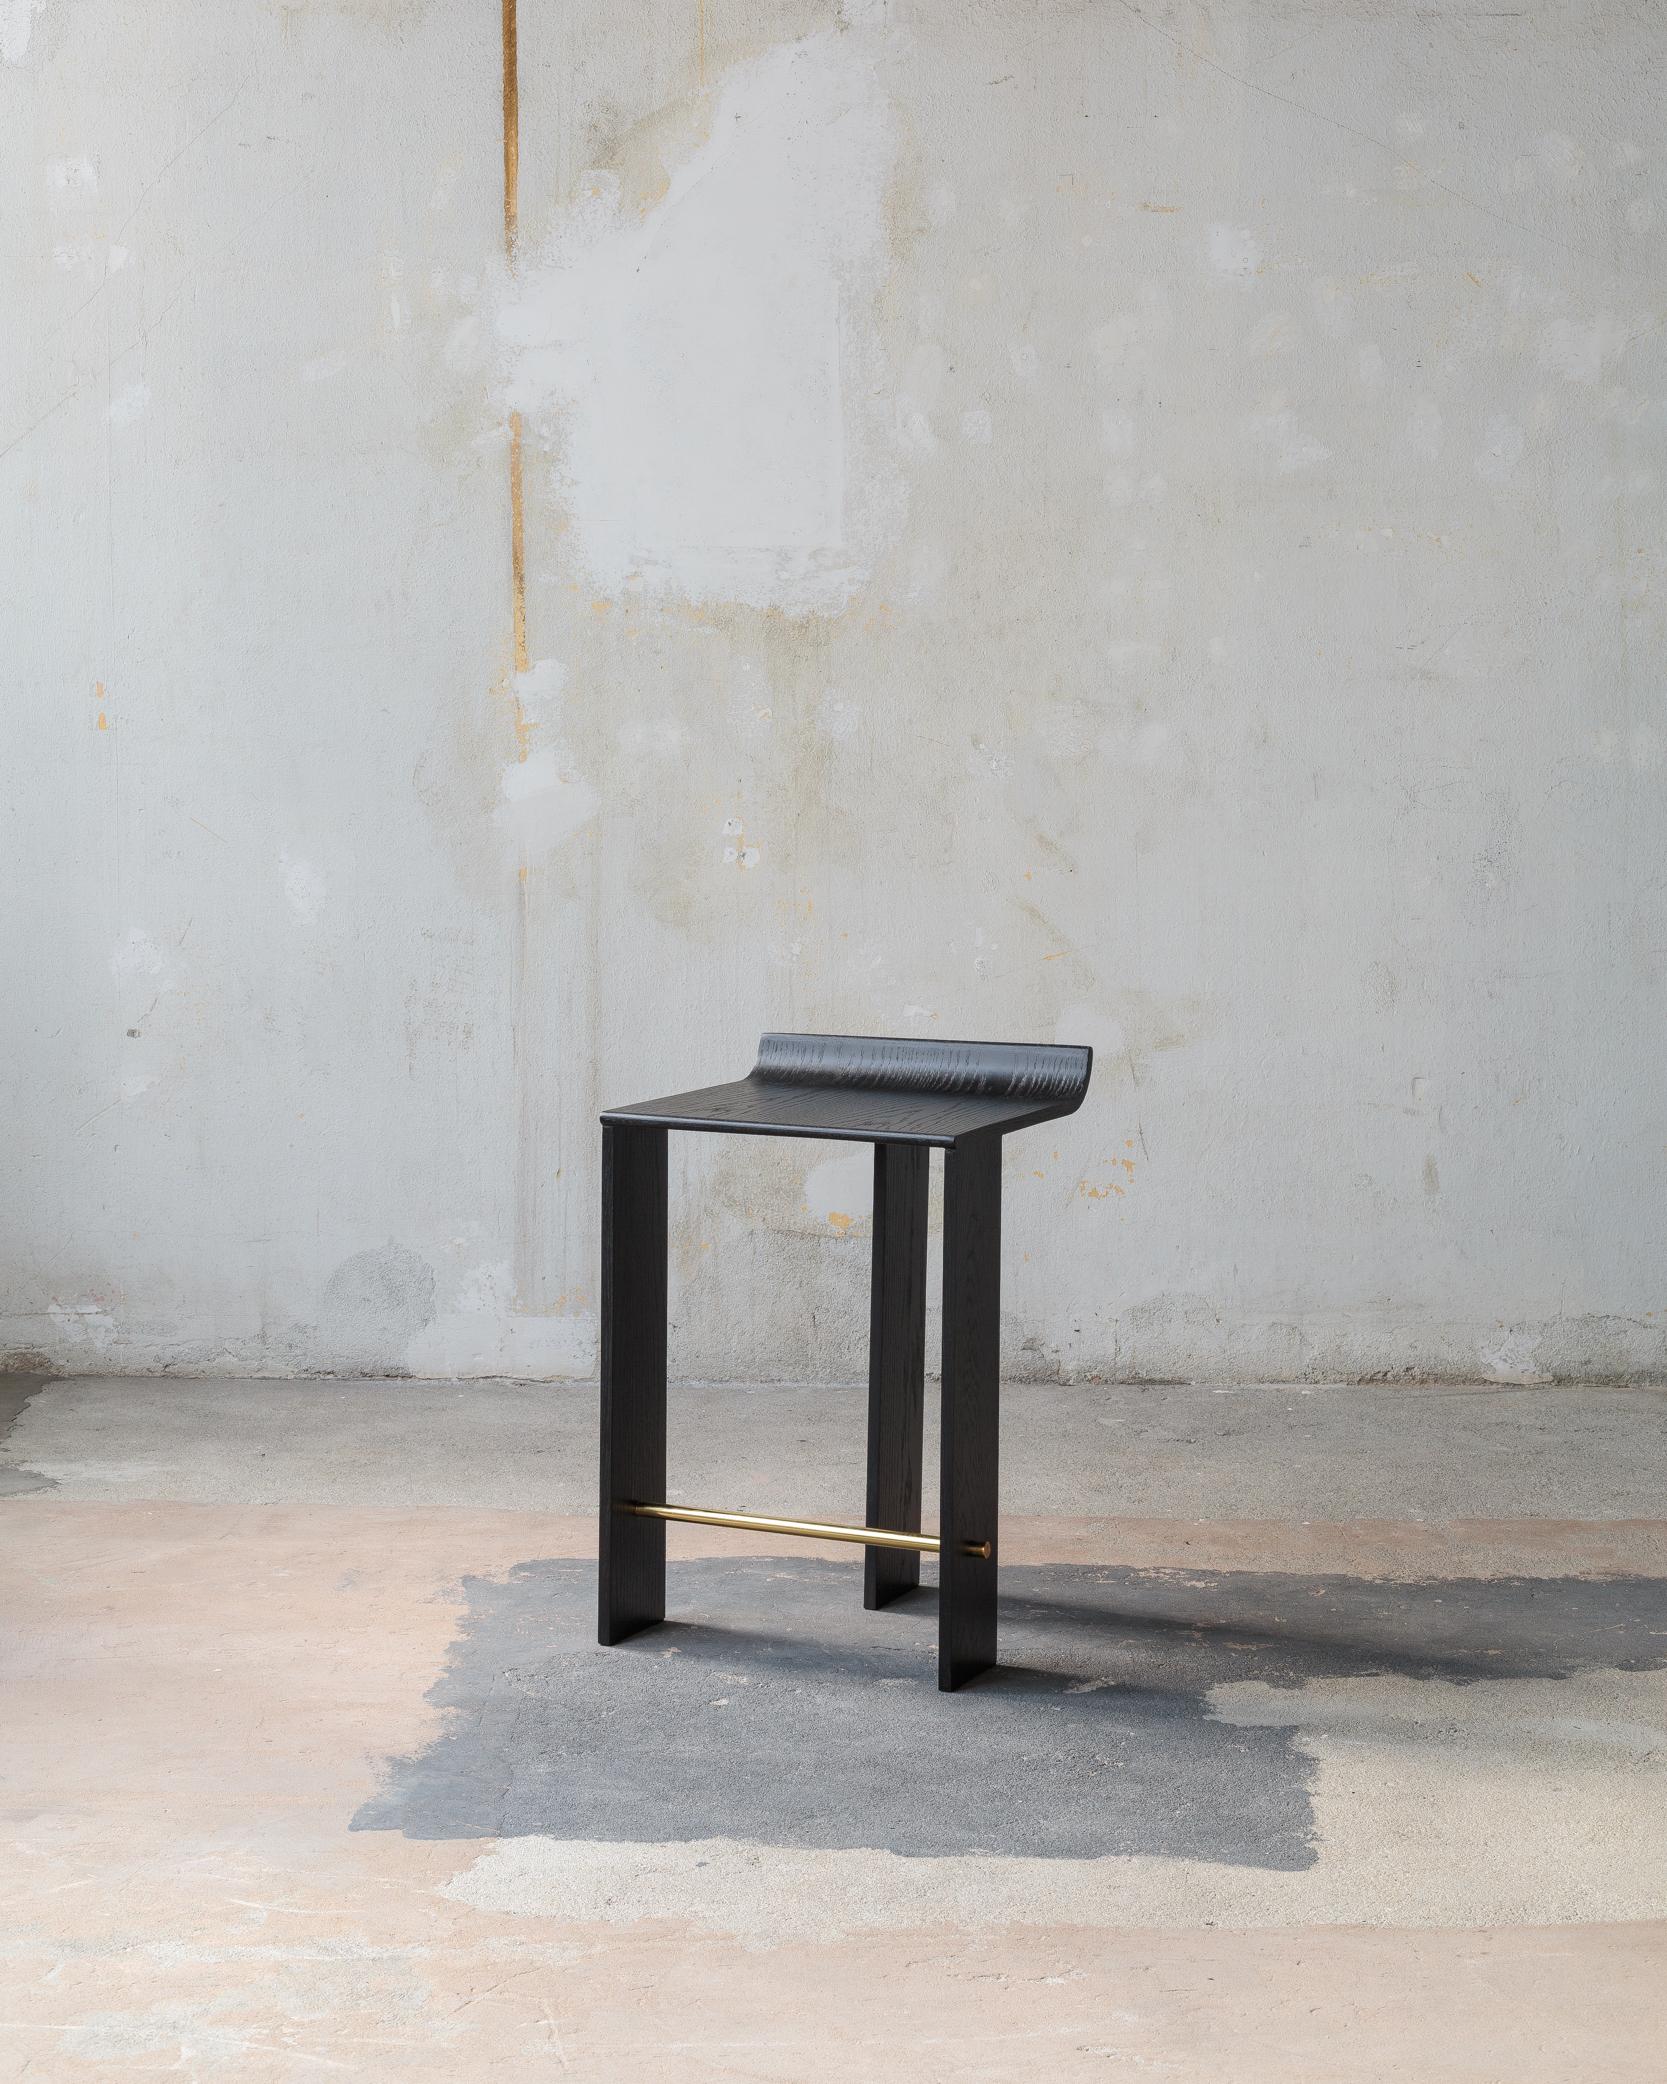 The series of three pieces originated from the chair, and was designed to suit a specific gesture of sitting, with elbows resting on the backrest. The design approach of the series is centered around simplicity and seeks the minimum effort required